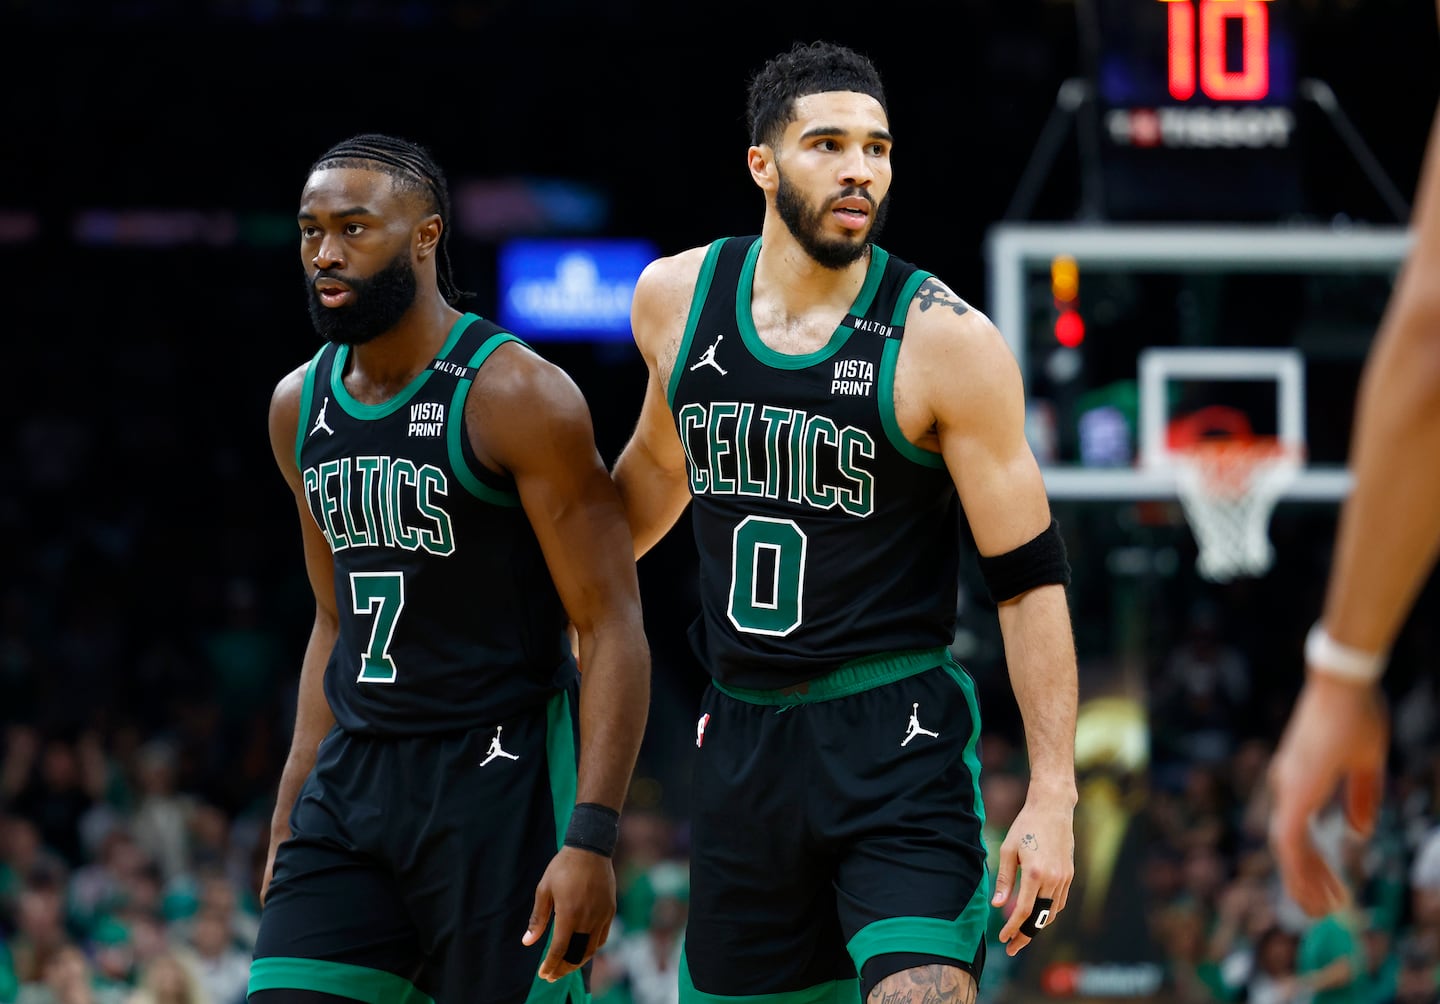 Pretty soon it will be time for Jayson Tatum (right) to take over the honor of having the richest contract in NBA history from teammate Jaylen Brown.